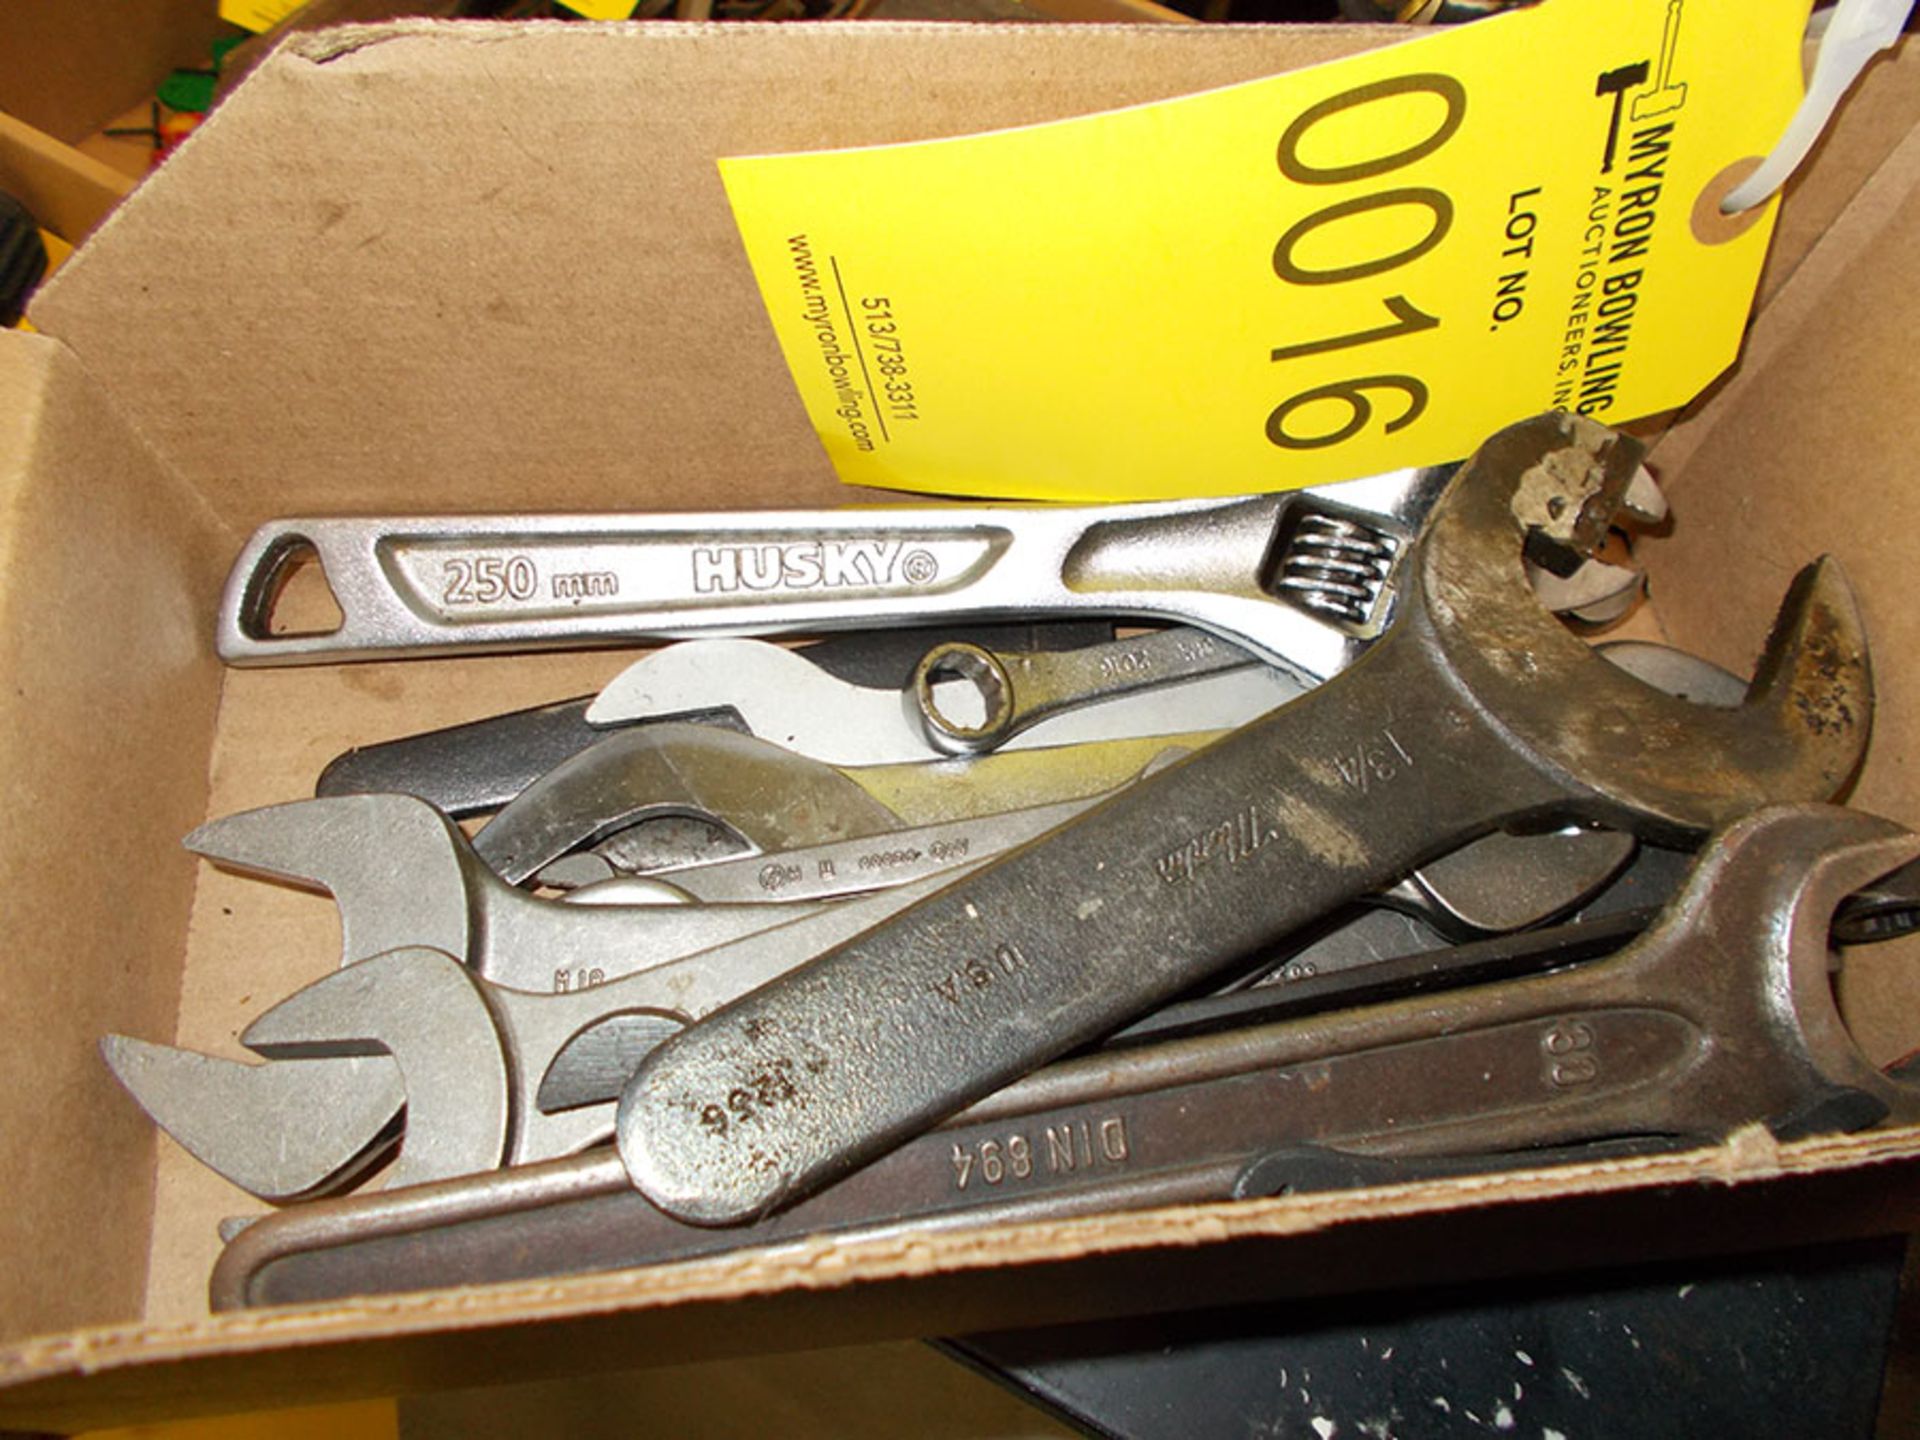 BOX OF WRENCHES